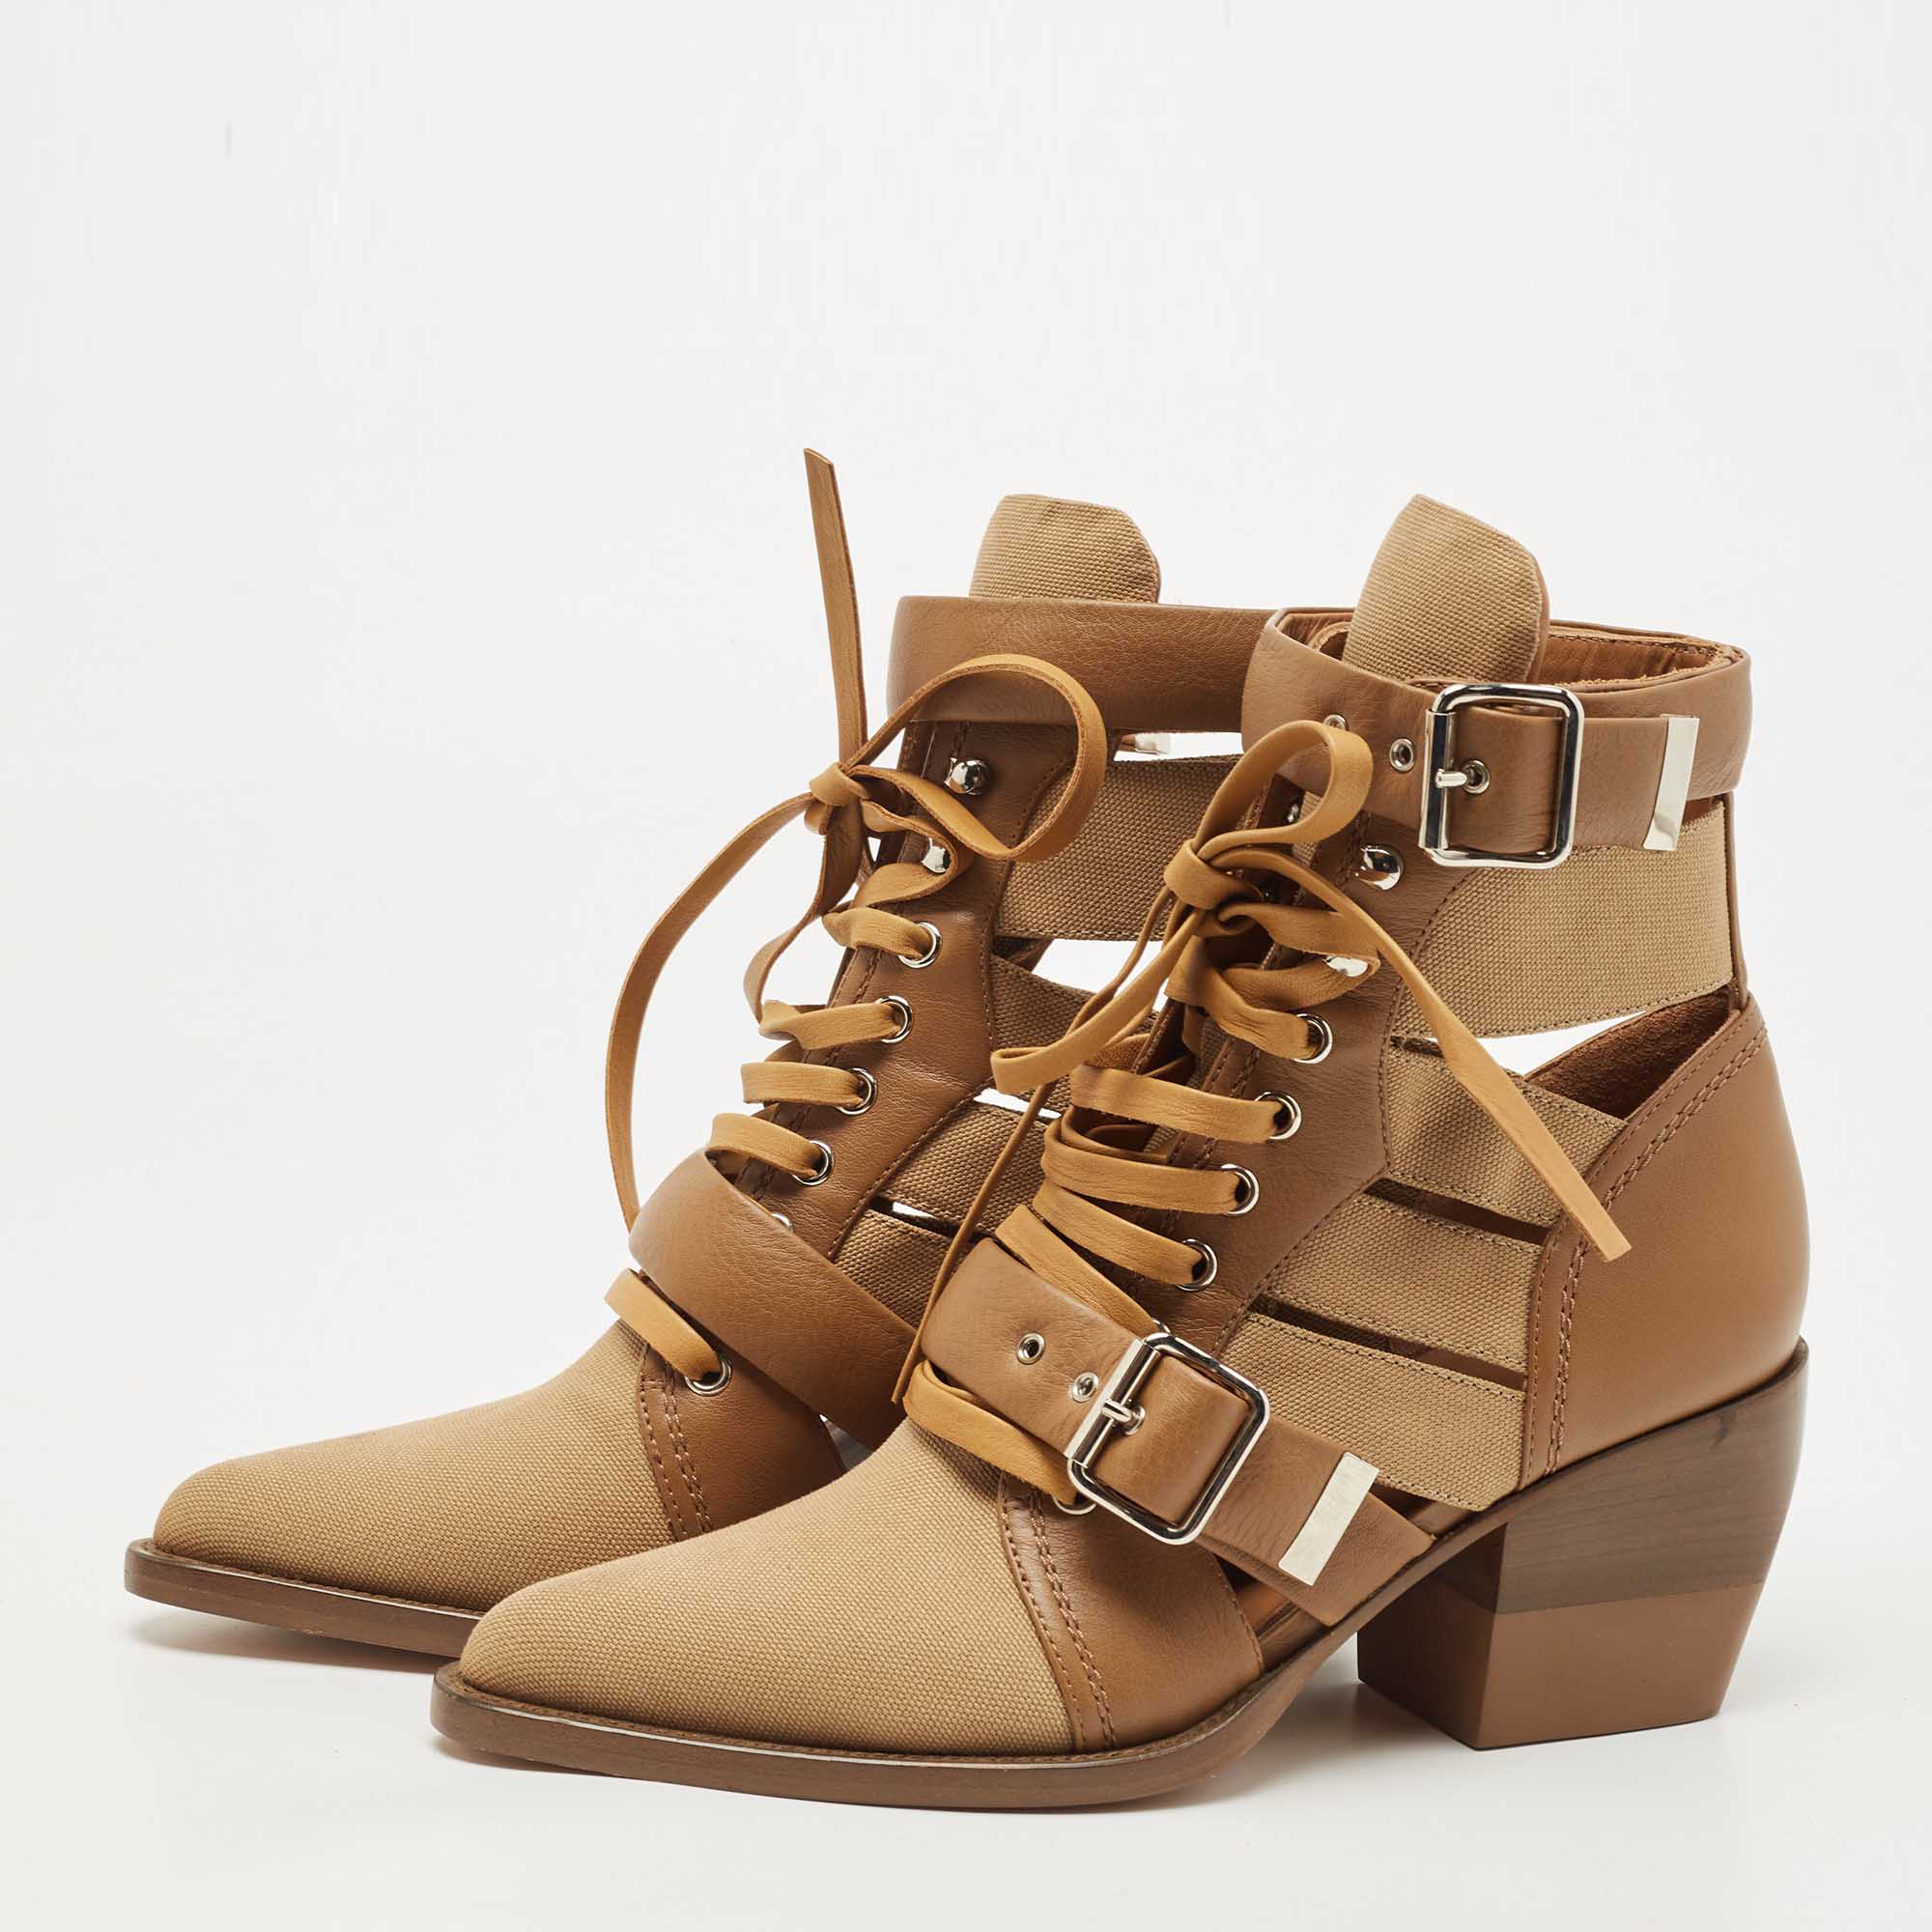 

Chloe Brown Leather and Canvas Rylee Cut Out Buckle Detail Ankle Boots Size